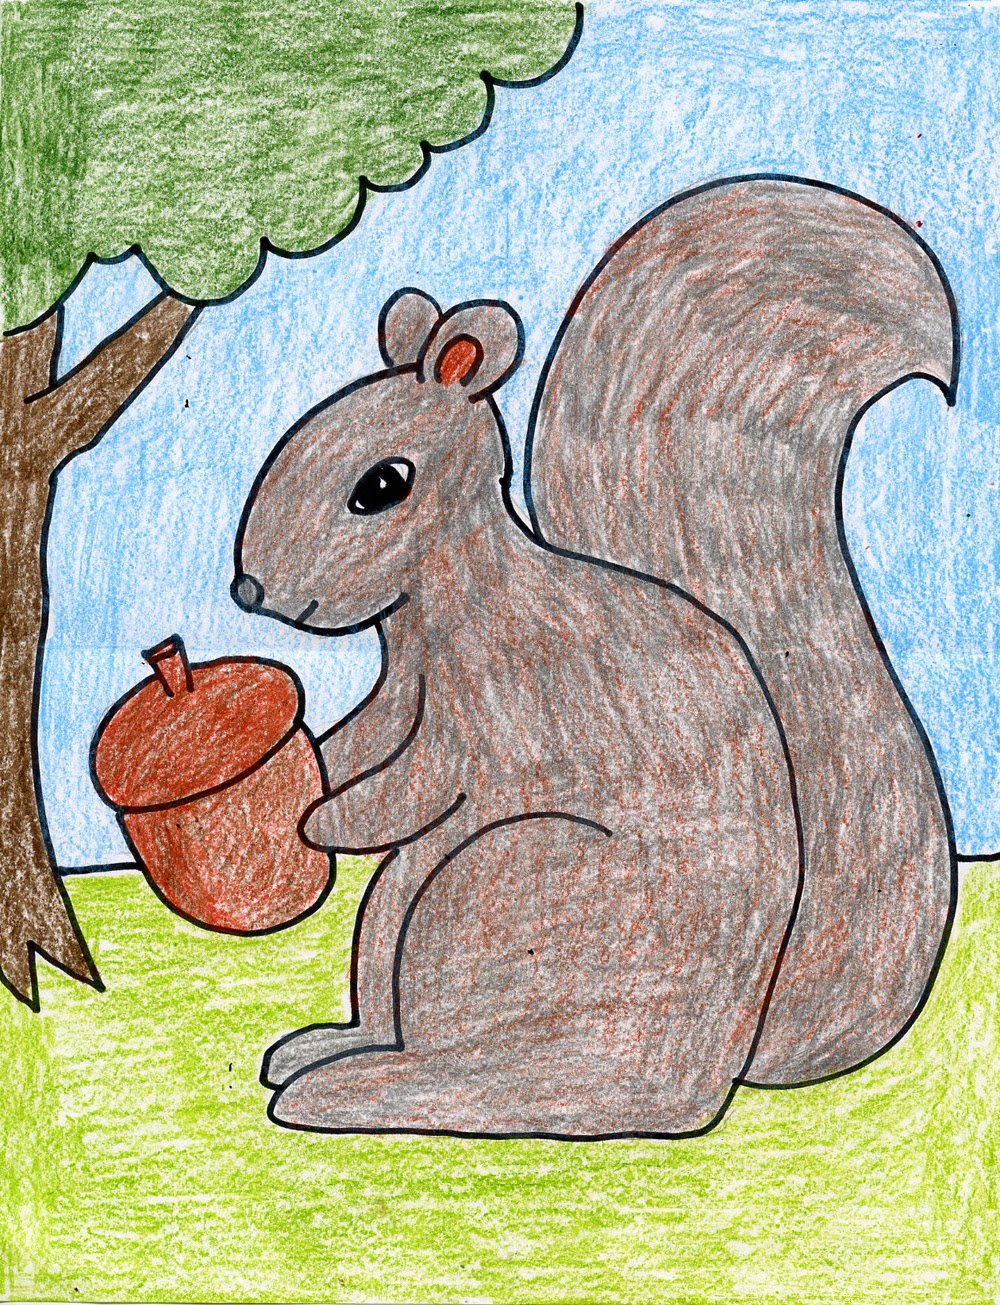 How to Draw a Squirrel - Art Projects for Kids